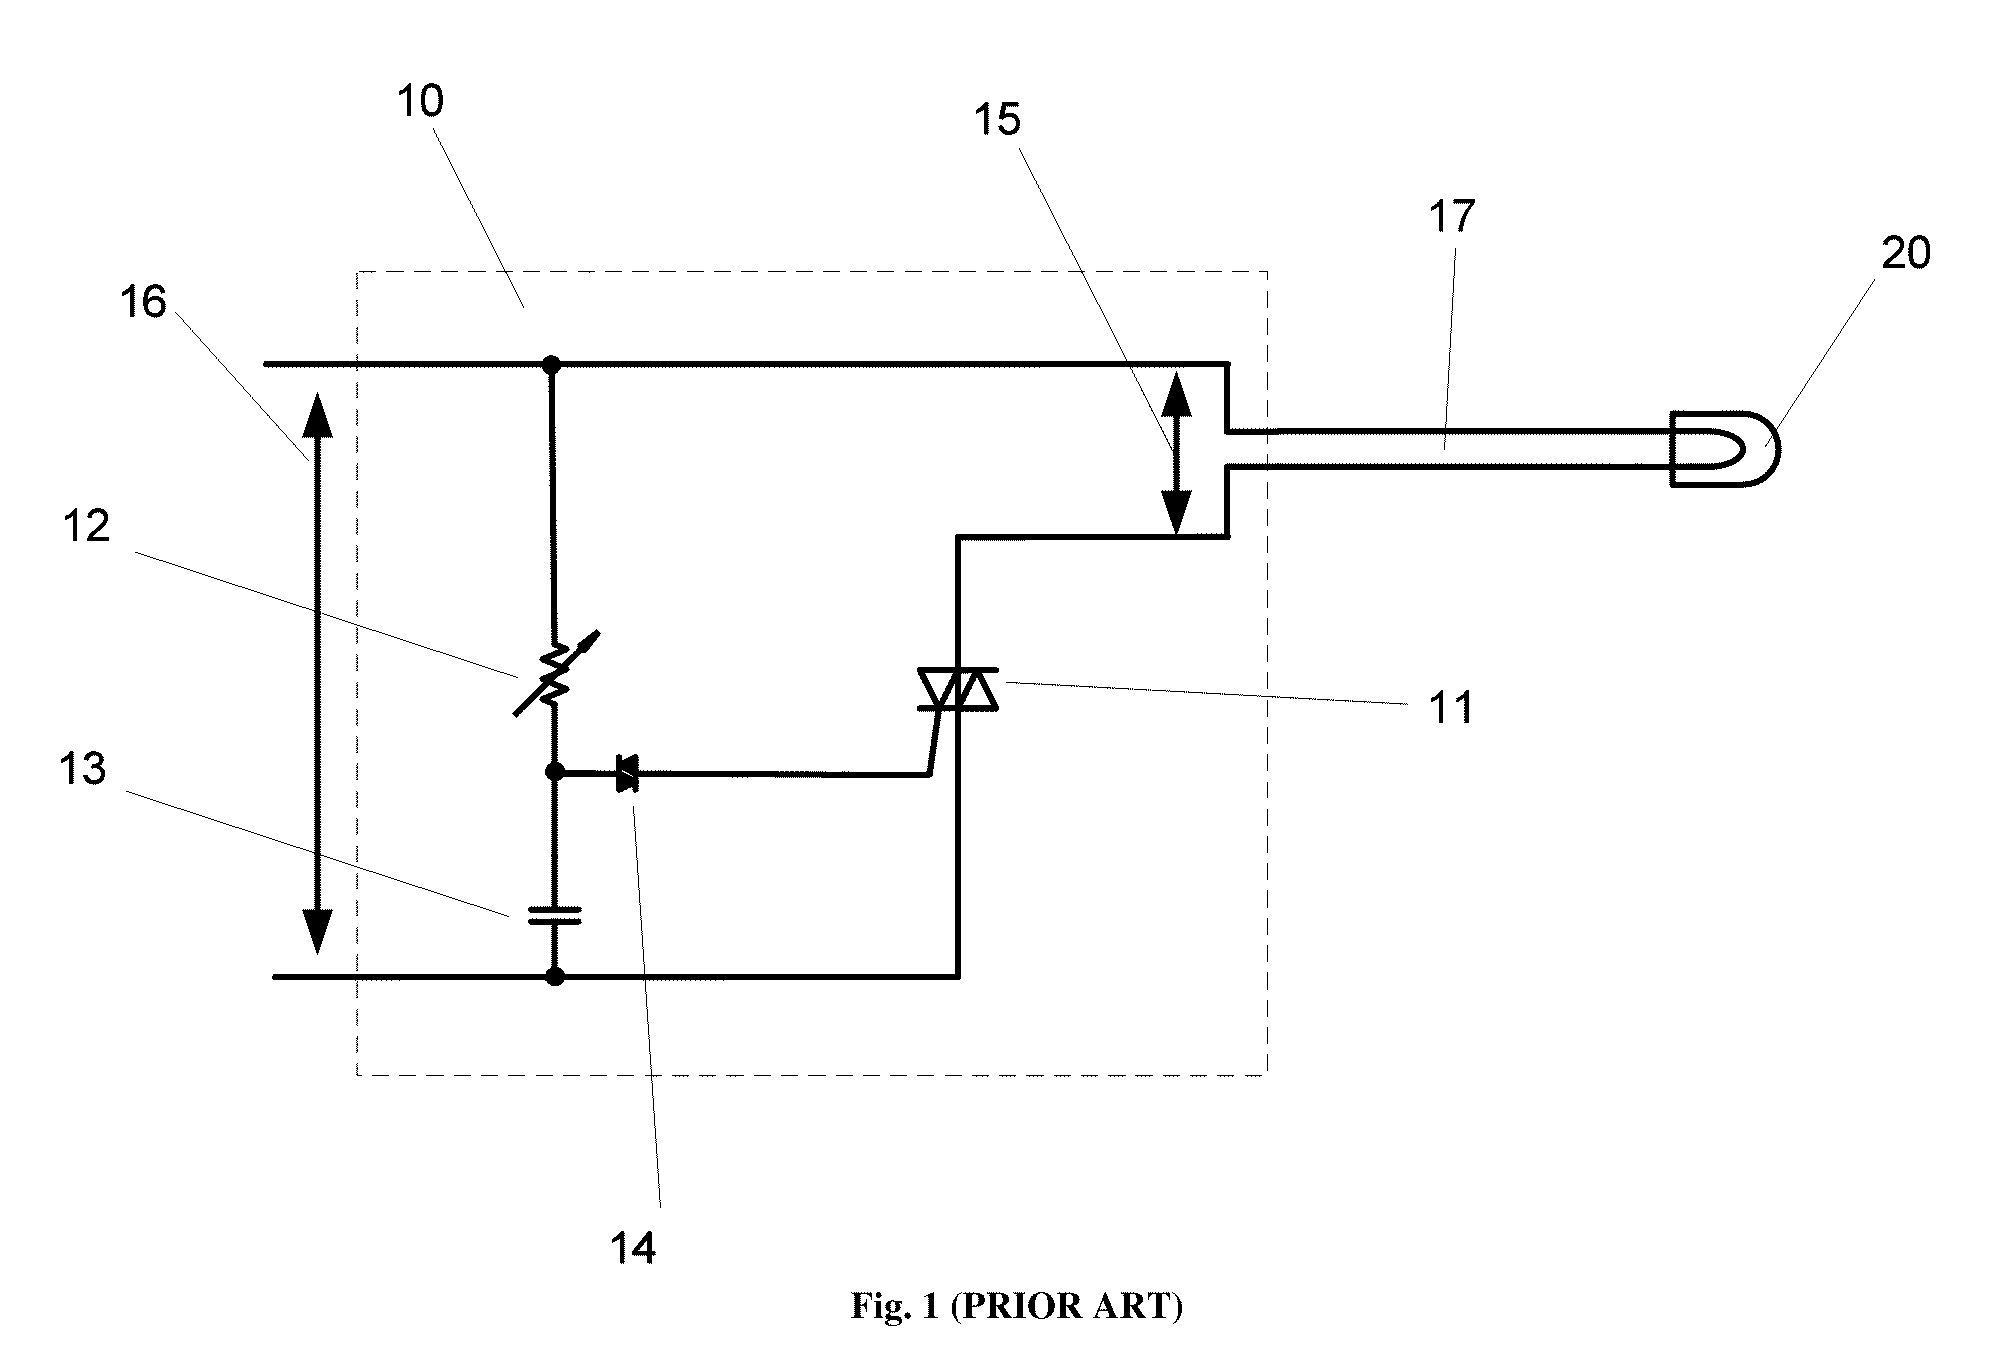 Method and Apparatus for Driving Low-Power Loads from AC Sources